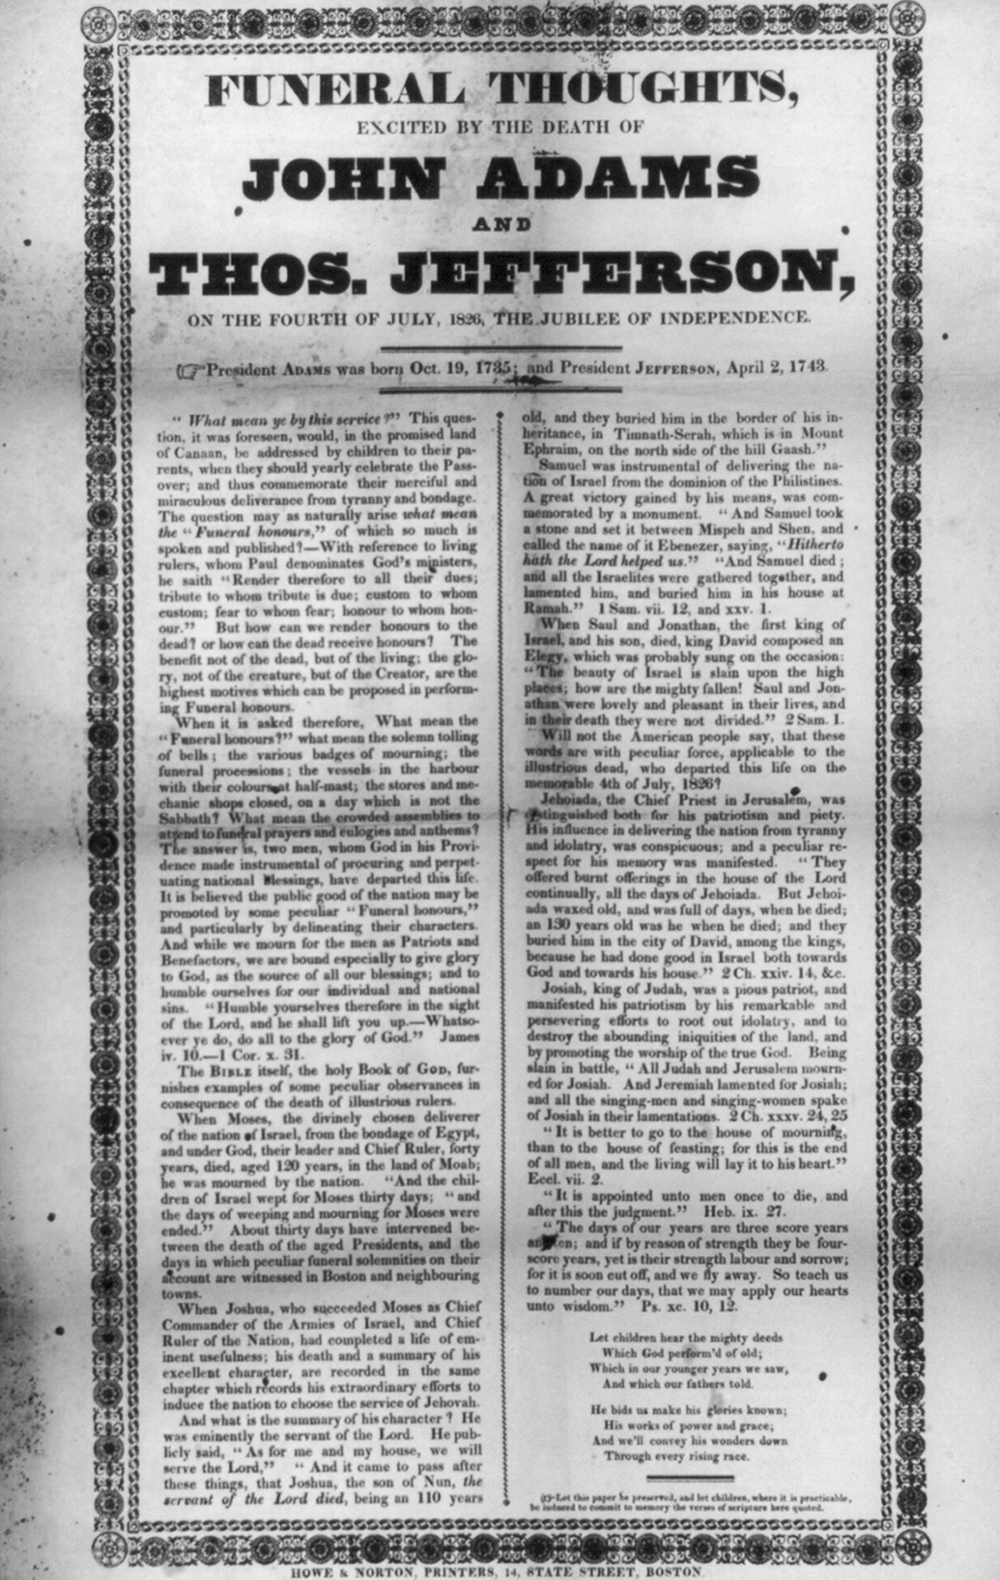 Funeral Thoughts, Excited by the Death of John Adams and Thomas Jefferson on the Fourth of July, 1826. Library of Congress, Prints and Photographs Division.